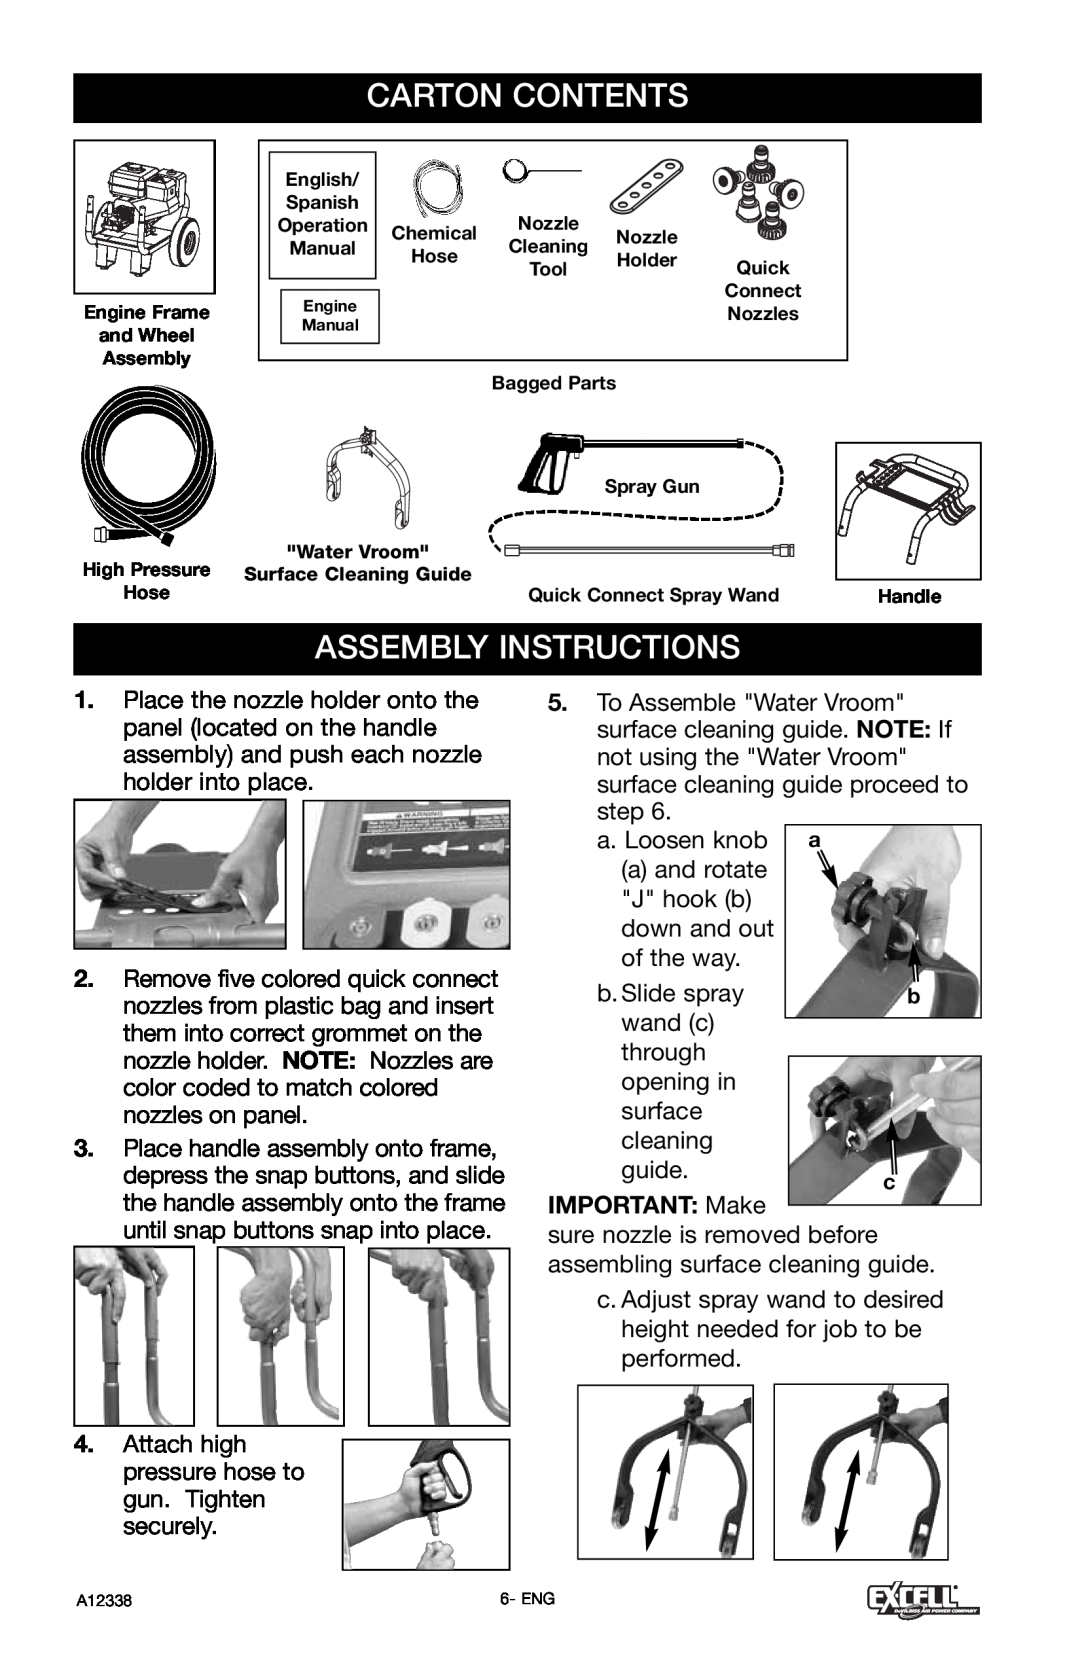 Excell Precision XR2750 operation manual Carton Contents, Assembly Instructions, IMPORTANT Make 